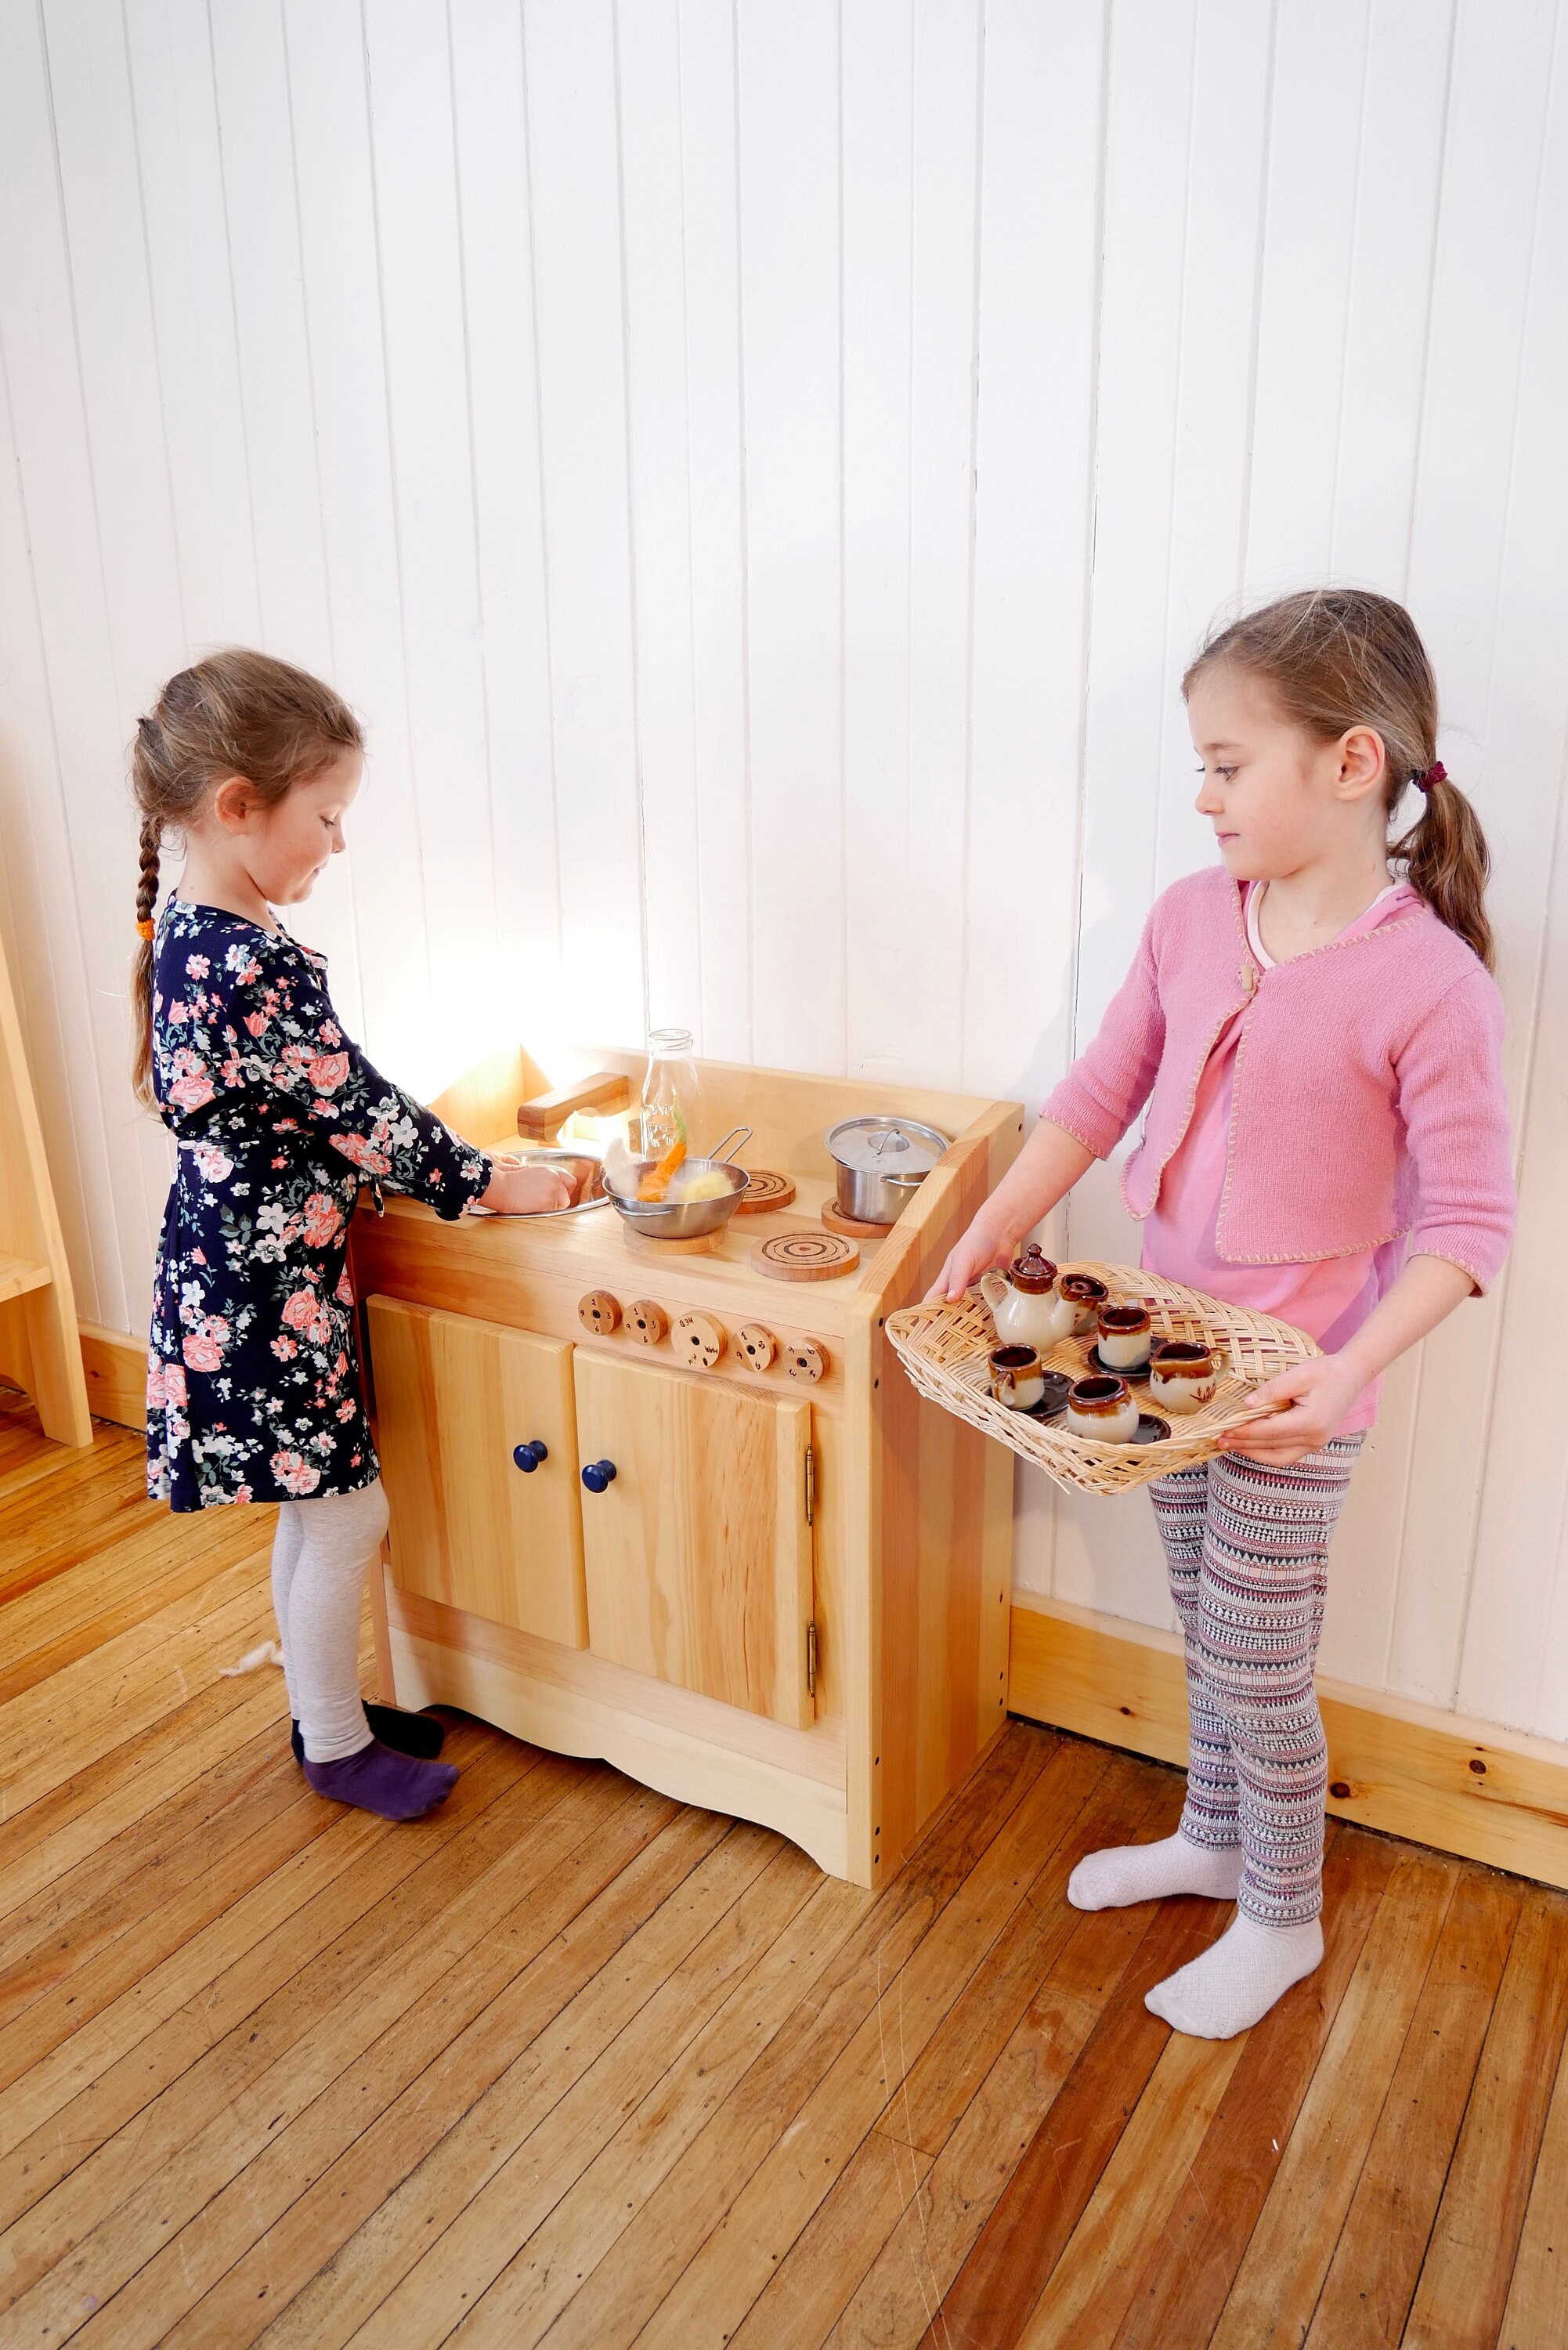 What is the Best Montessori Play Kitchen? (3 Top Picks) — The Montessori-Minded  Mom